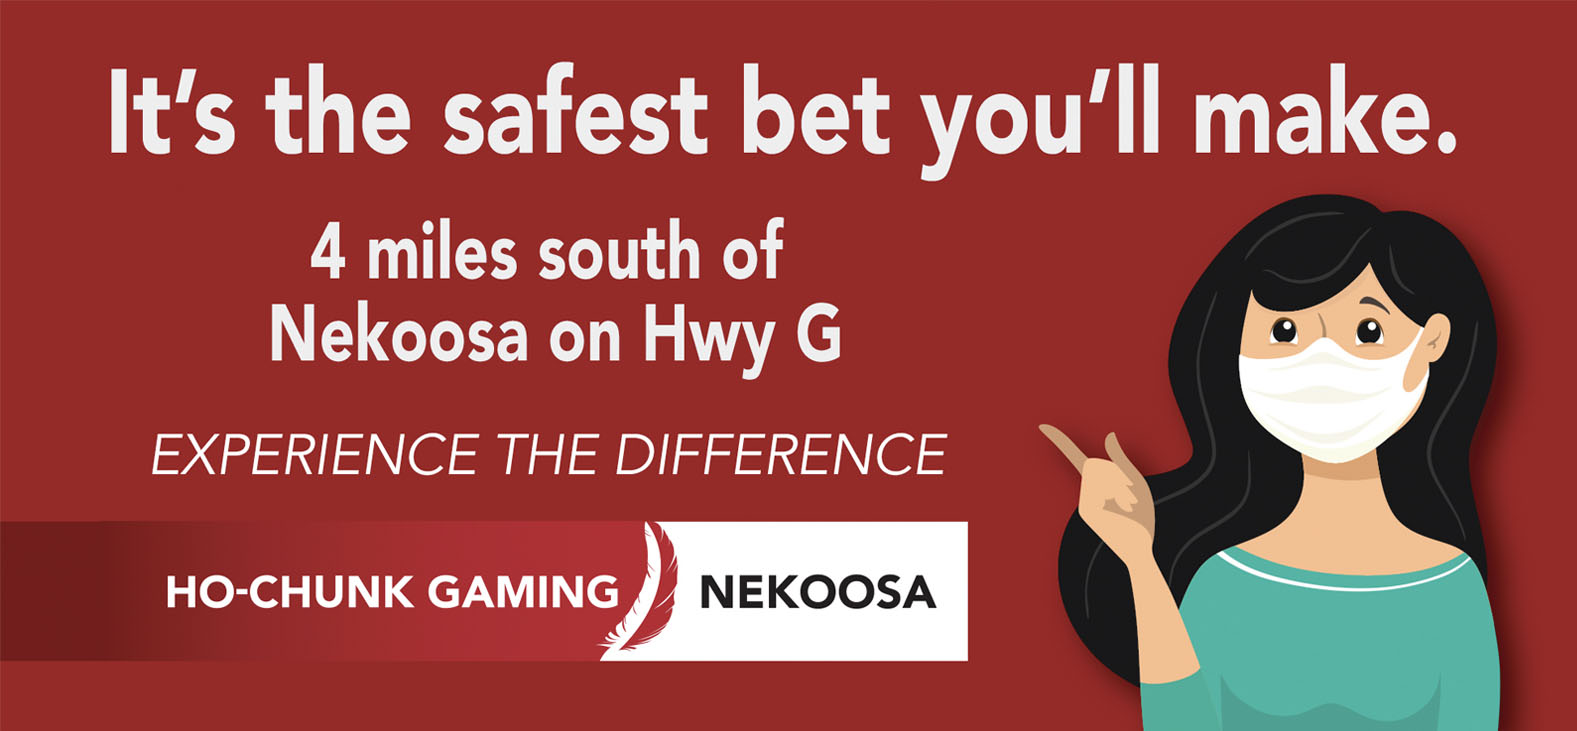 ho chunk's It's the safest bet you'll make campaign graphic